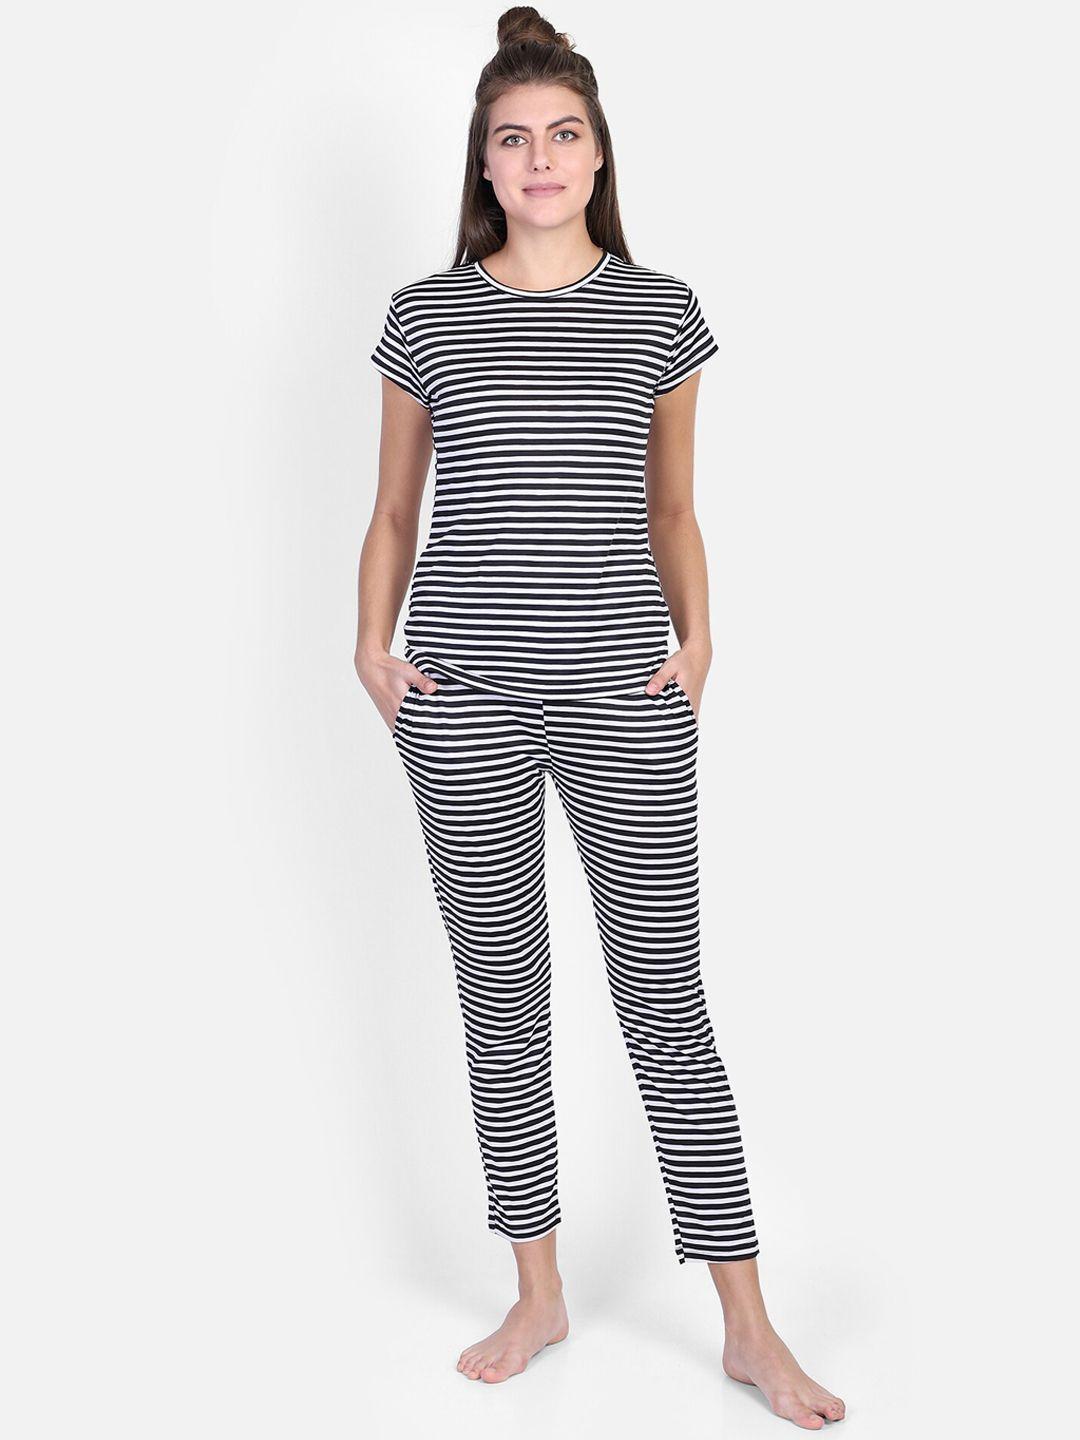 proteens women black & white striped night suit